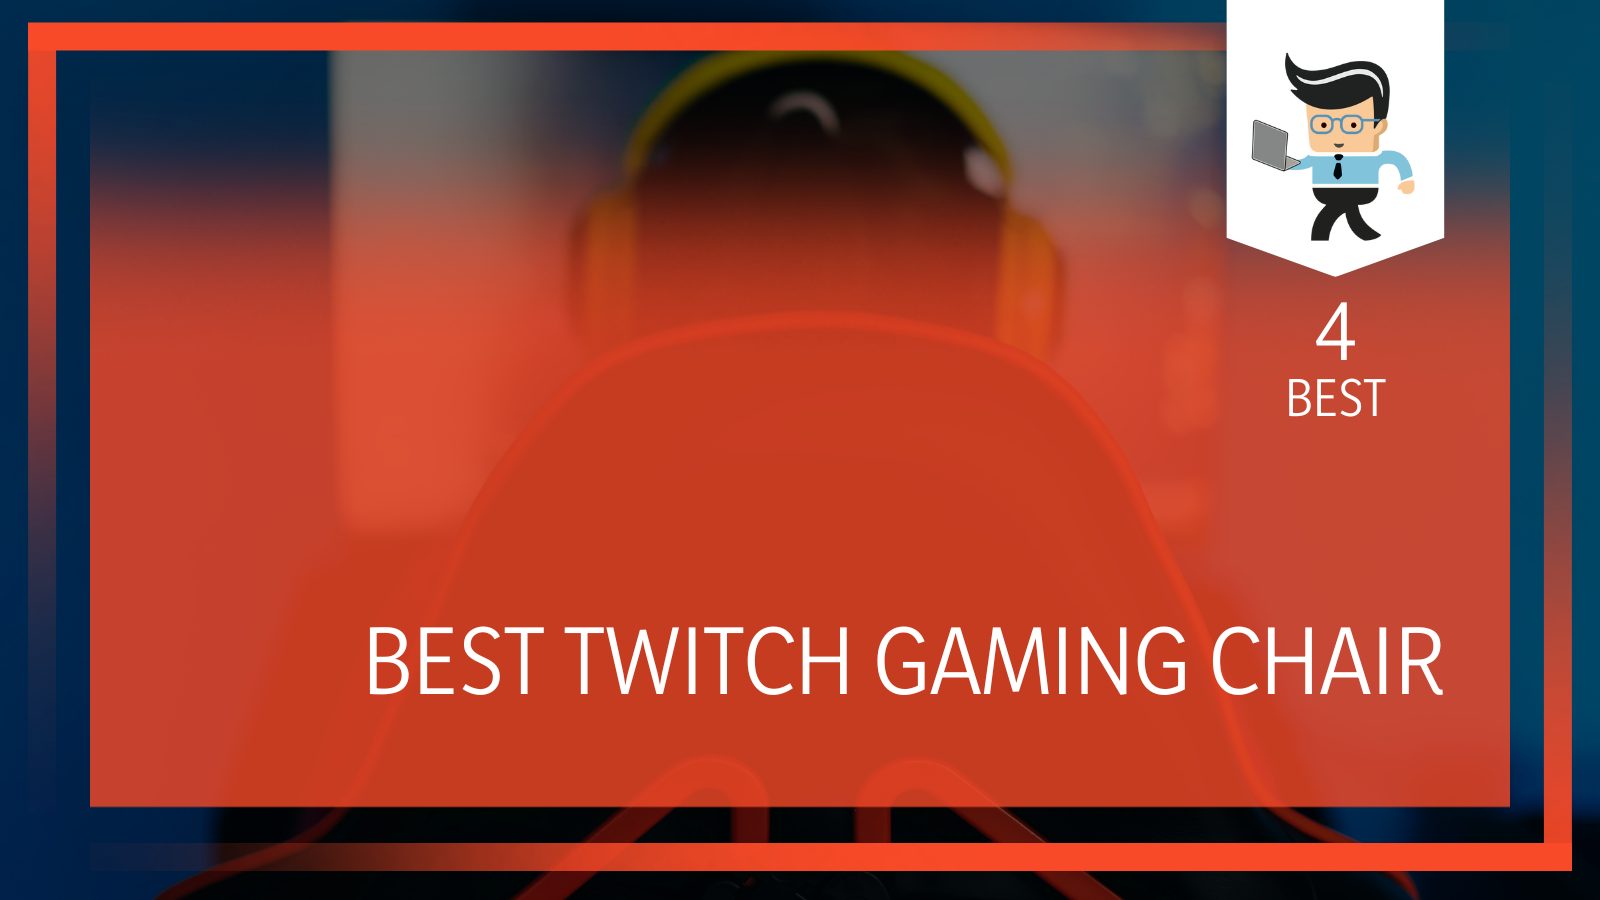 Best twitch gaming chair for pro gamers